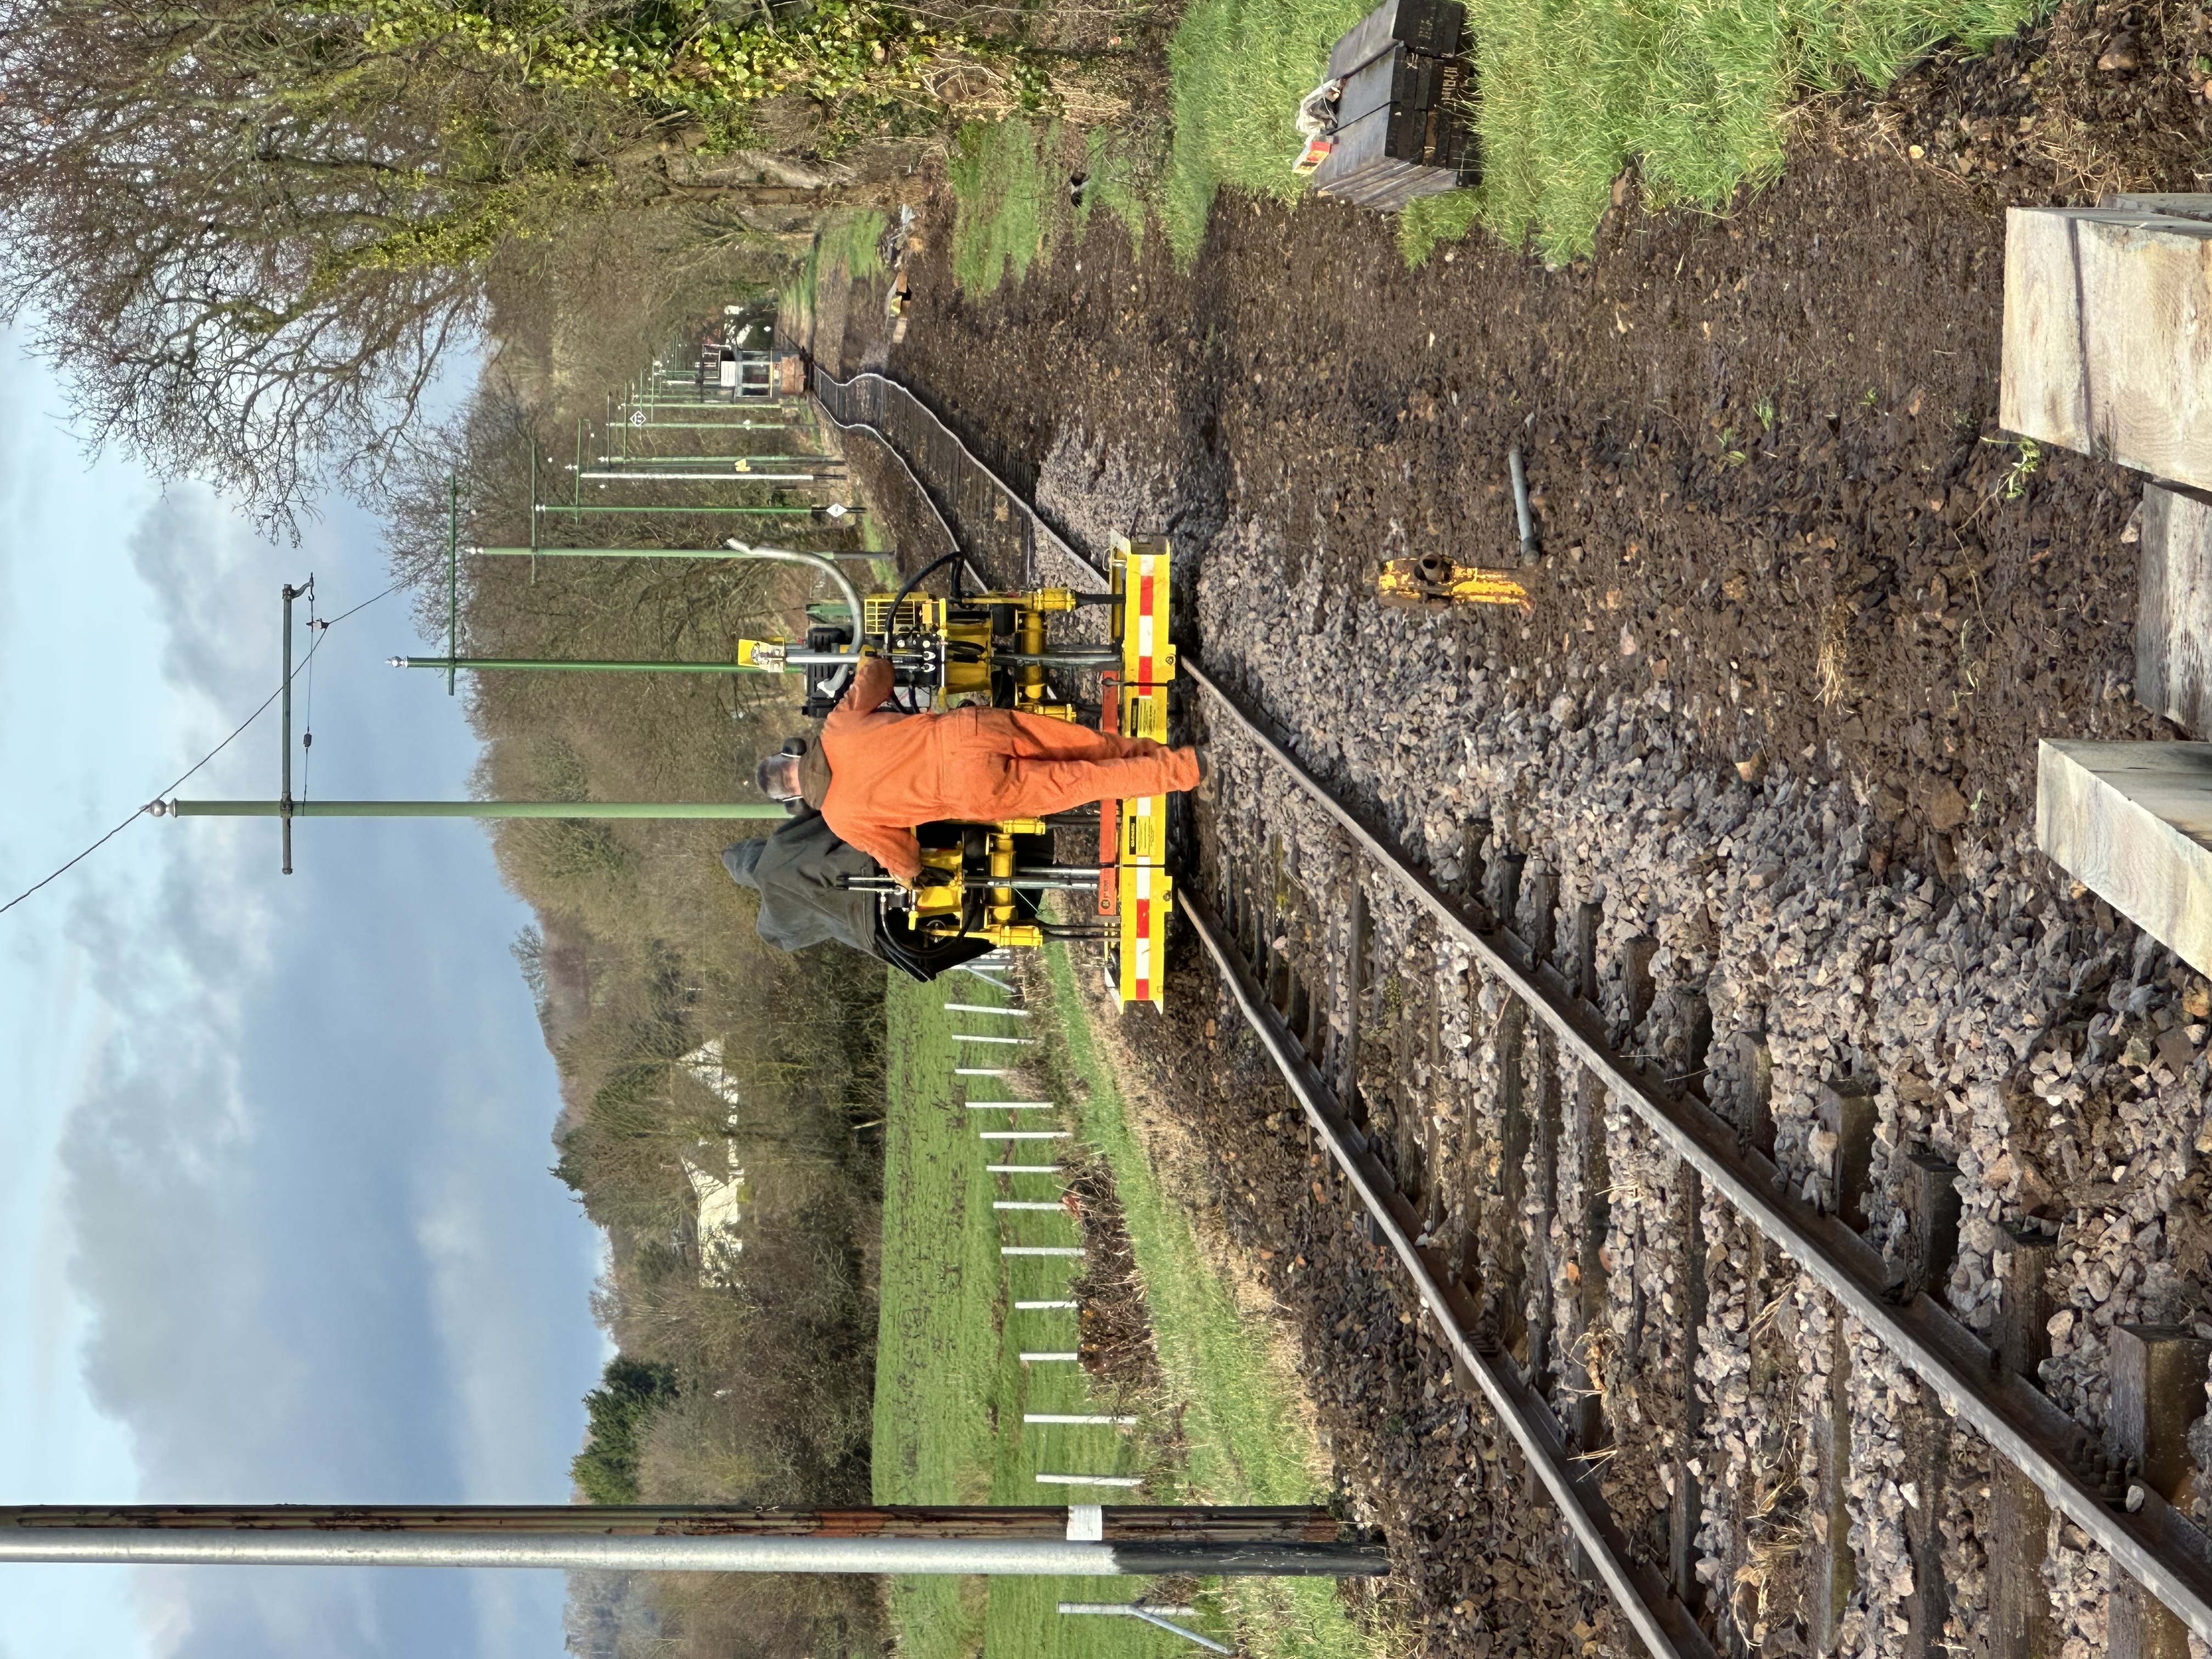 Tamping the new track north of Tye Lane